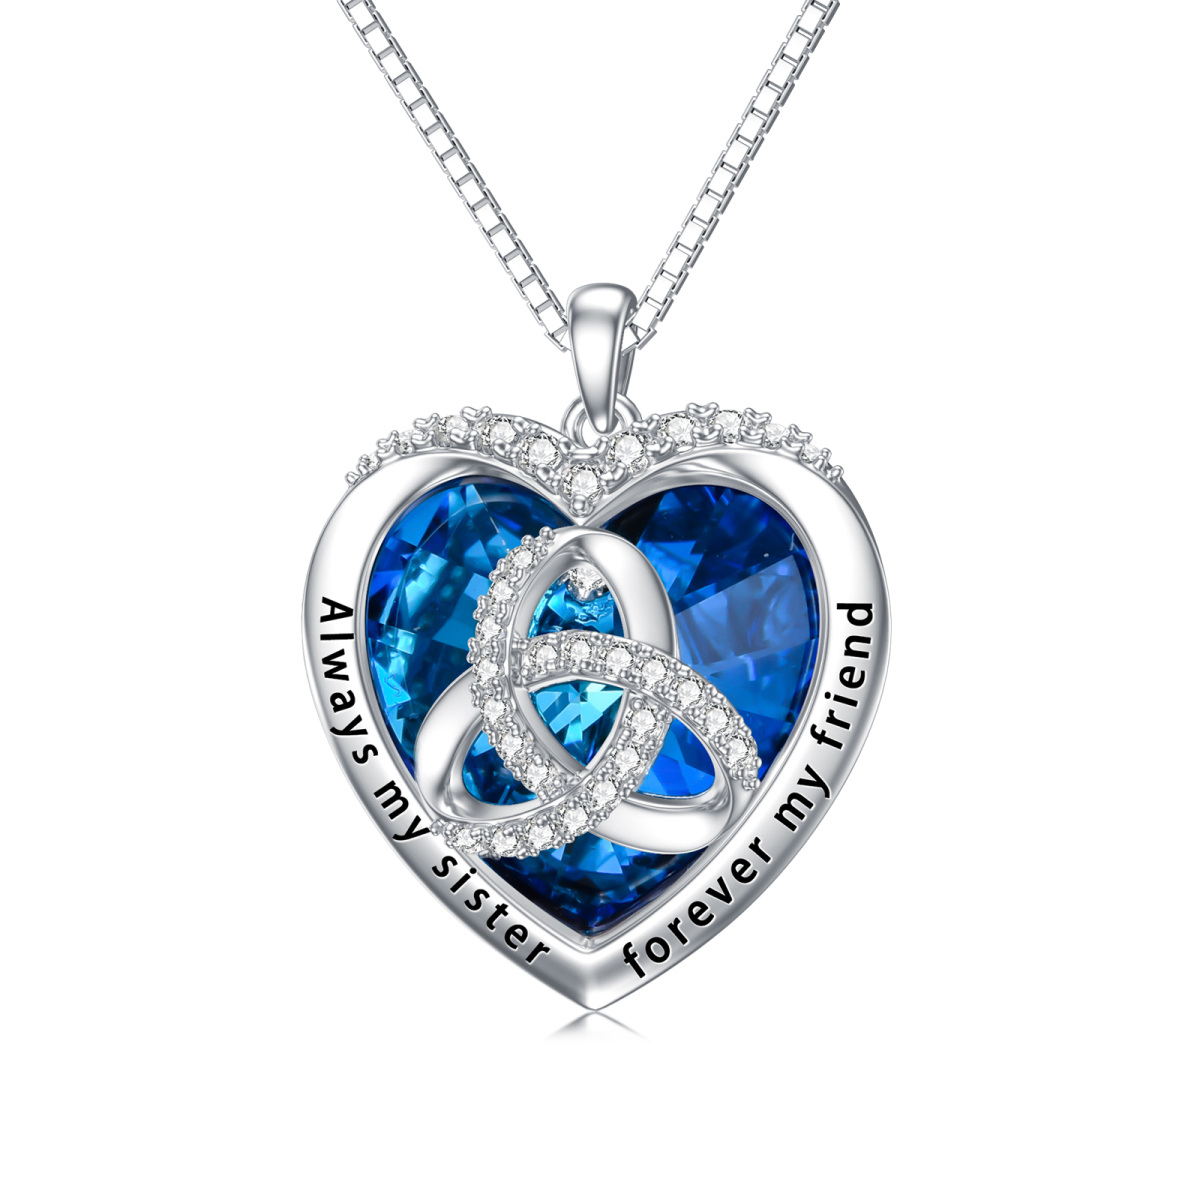 Sterling Silver Heart Shaped Celtic Knot & Heart Crystal Pendant Necklace with Engraved Word-1